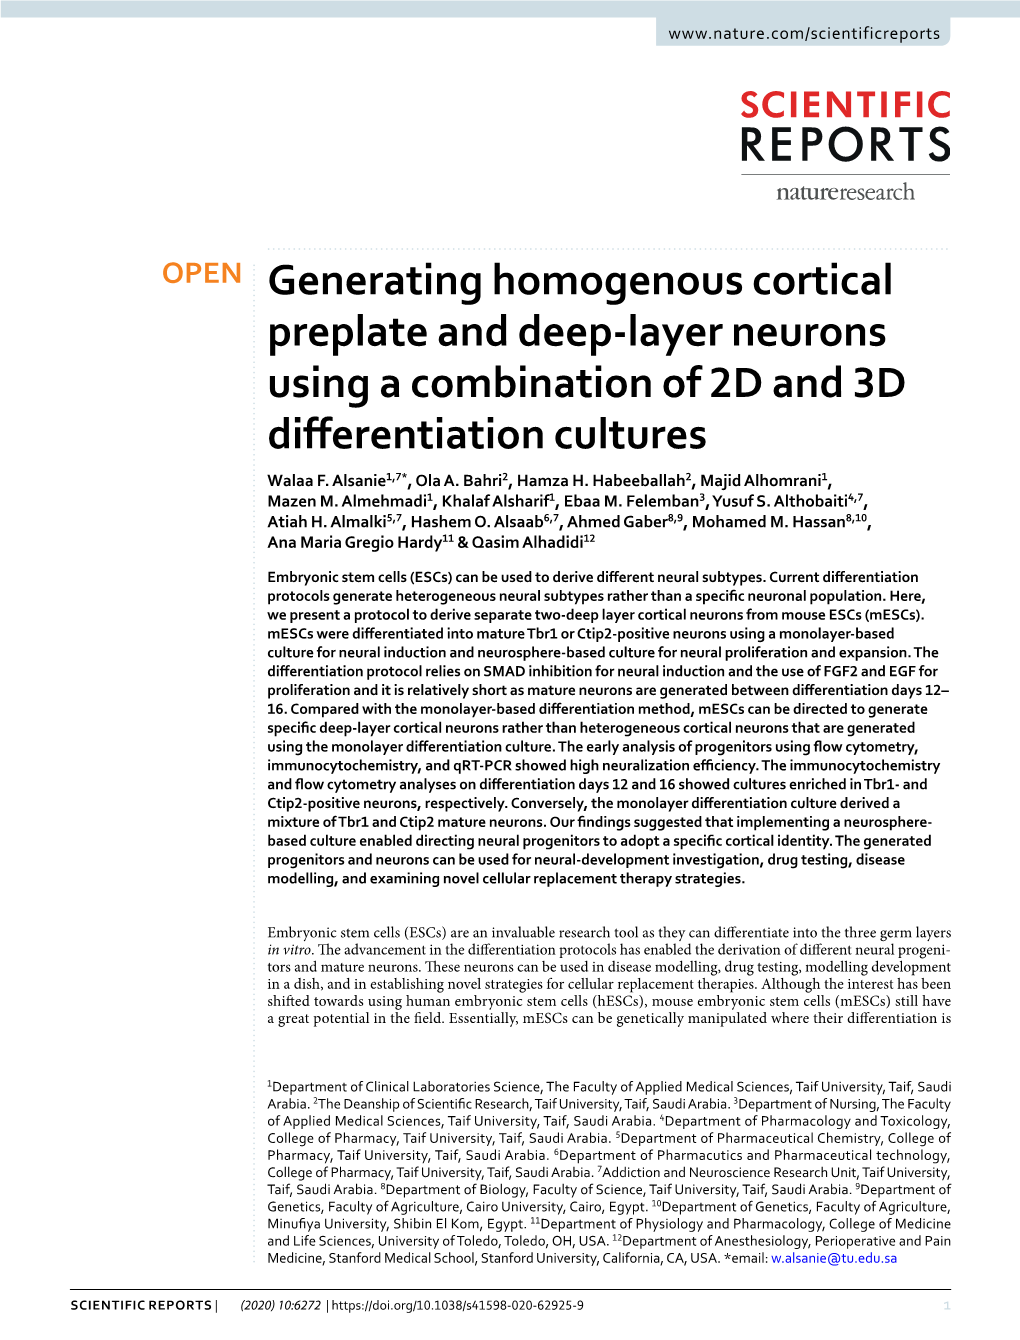 Generating Homogenous Cortical Preplate and Deep-Layer Neurons Using a Combination of 2D and 3D Differentiation Cultures